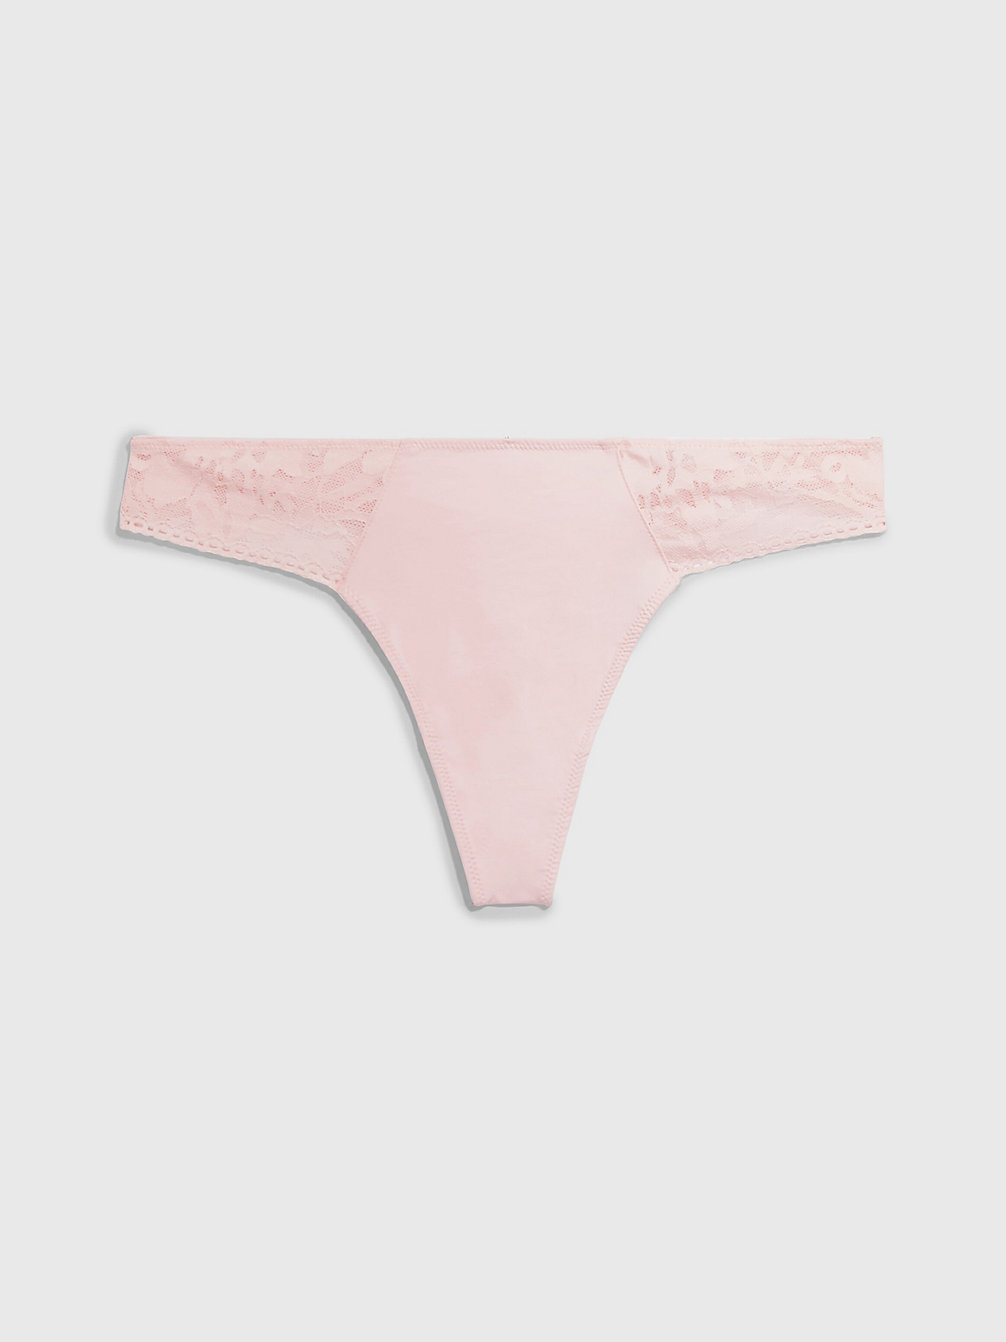 PINK Thong - Ultra Soft Lace undefined women Calvin Klein